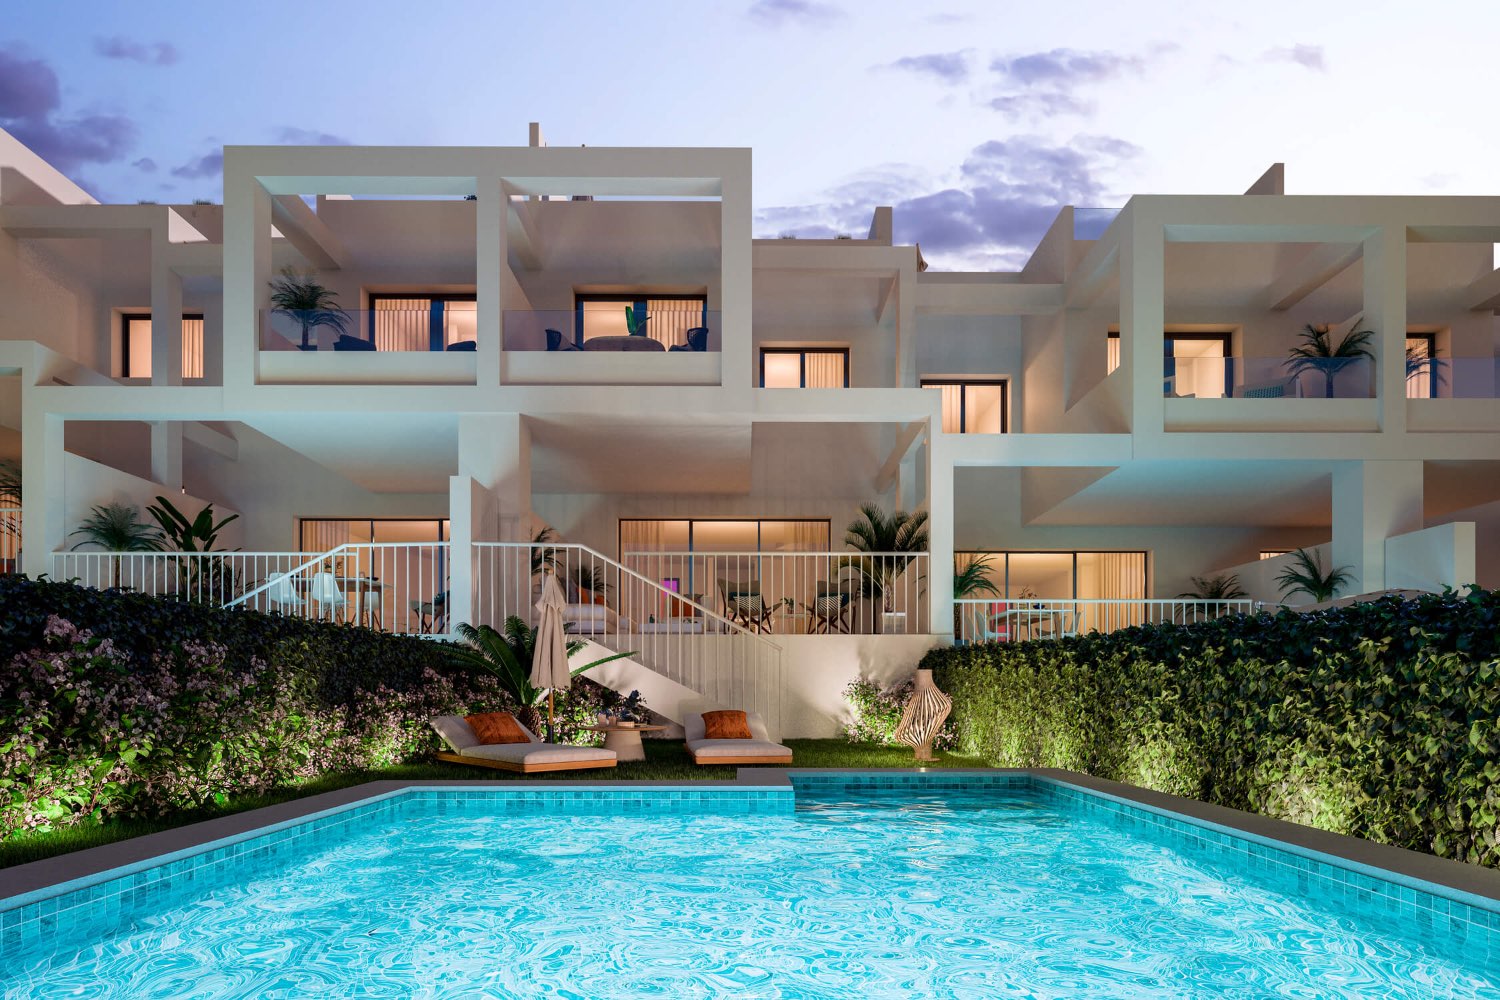 Newly built high quality townhouses with panoramic sea views